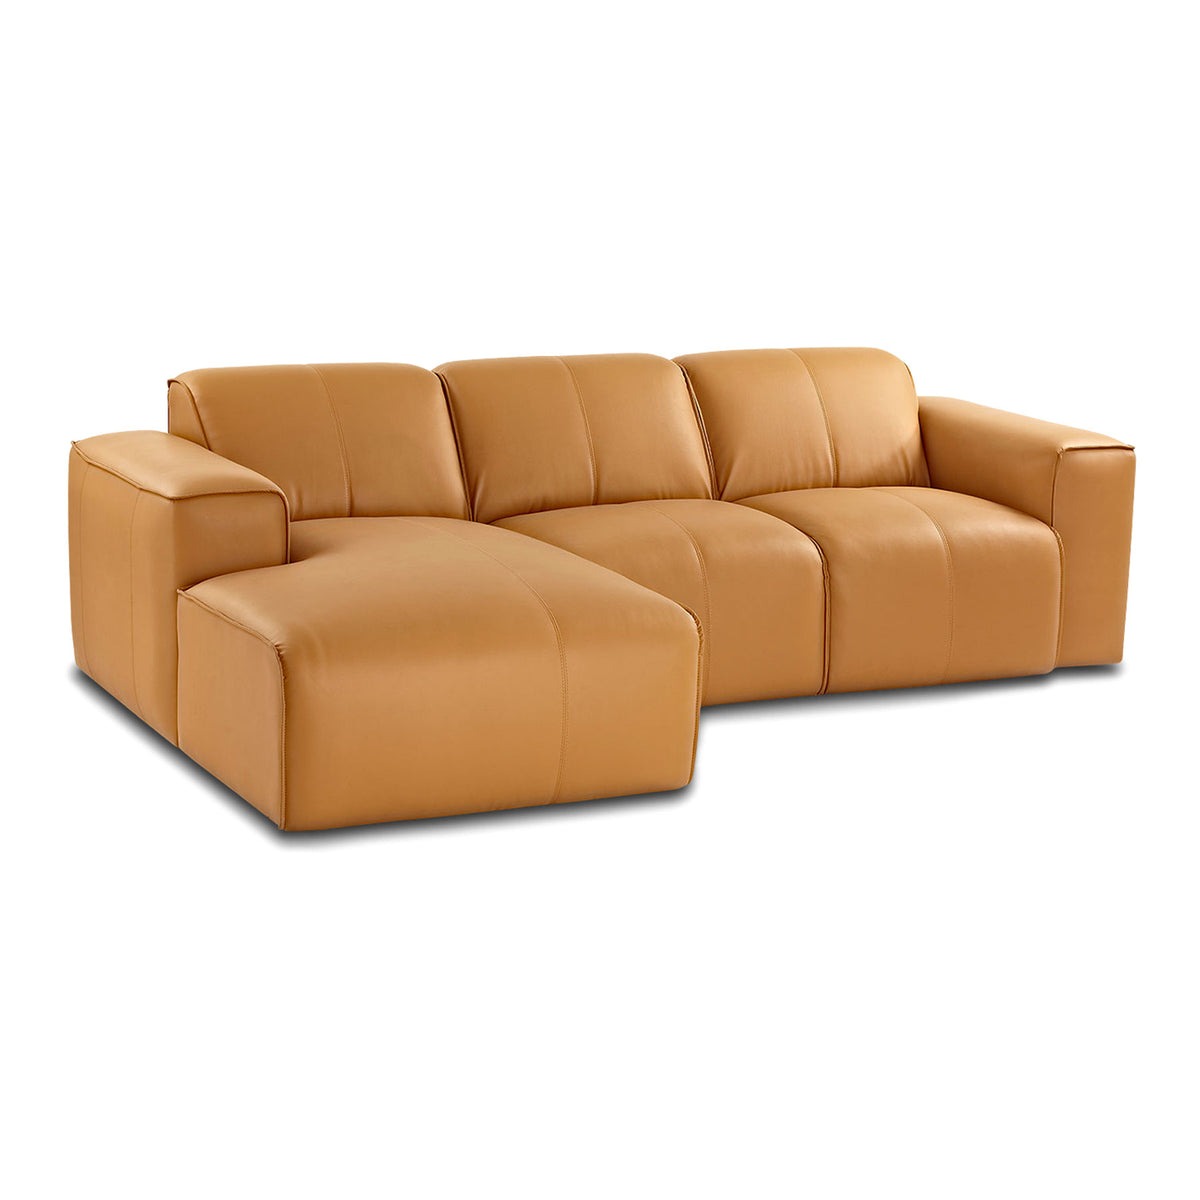 Werfo August 3-Seater Sofa Tan LHS (Left Hand Side) - H 30"x W 83" x D 65"